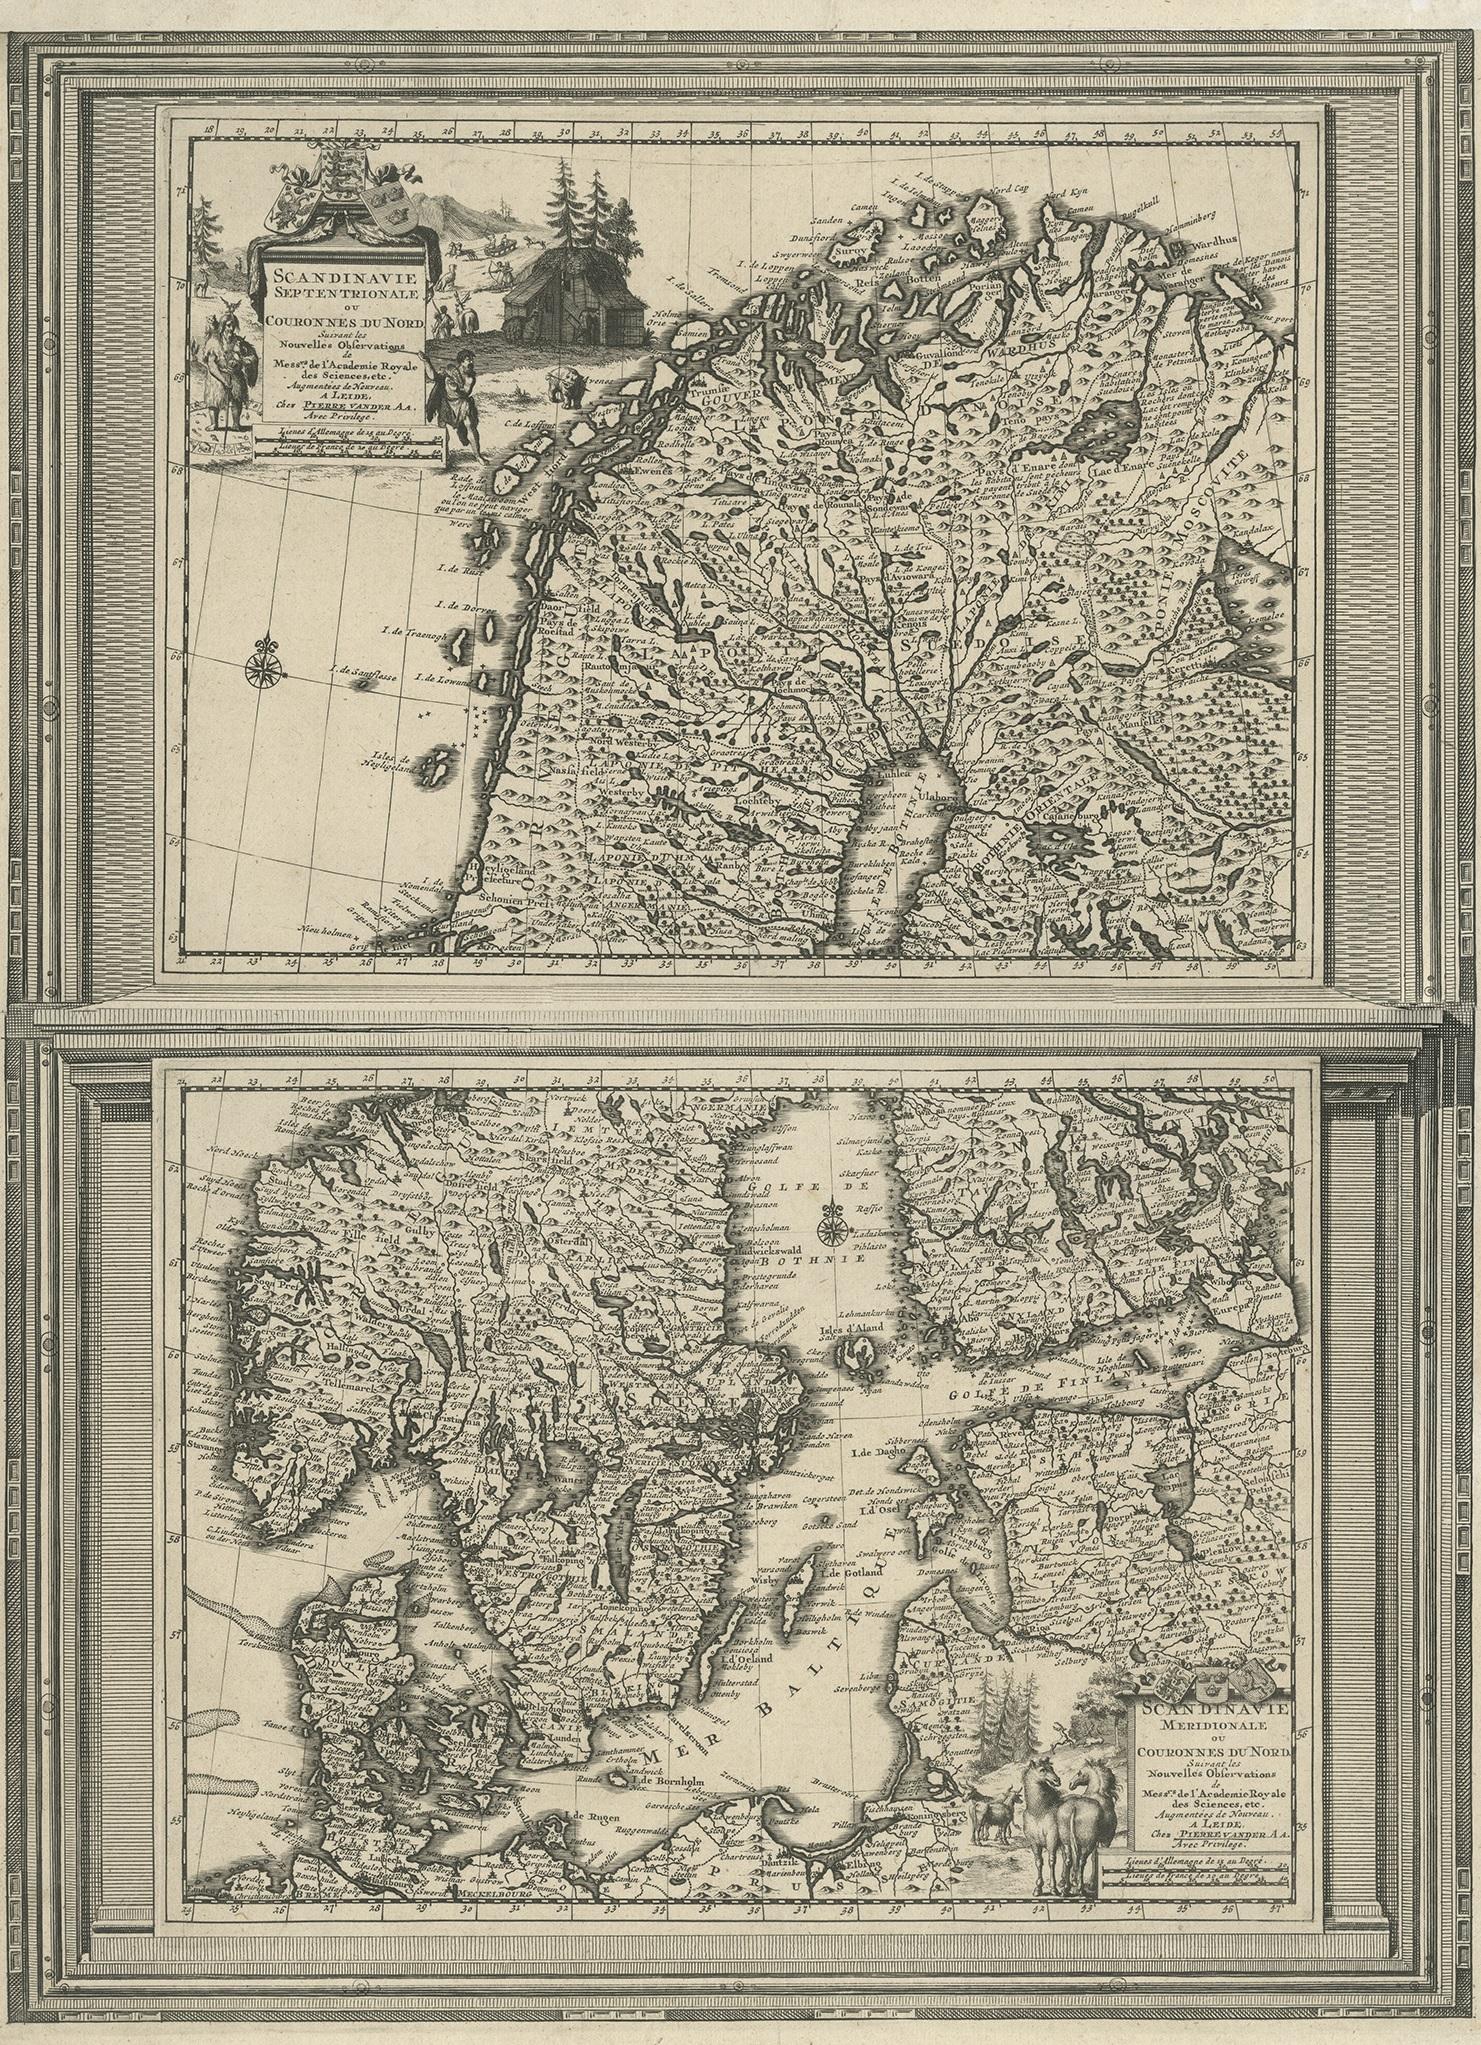 Antique map titled 'Scandinavie Septentrionale' and 'Scandinavie Meridionale'. Copper engraving with two maps on one sheet. The upper map depicts Northern Scandinavia with Norway, Sweden and Finland. The lower map depicts the Baltic Sea and Southern